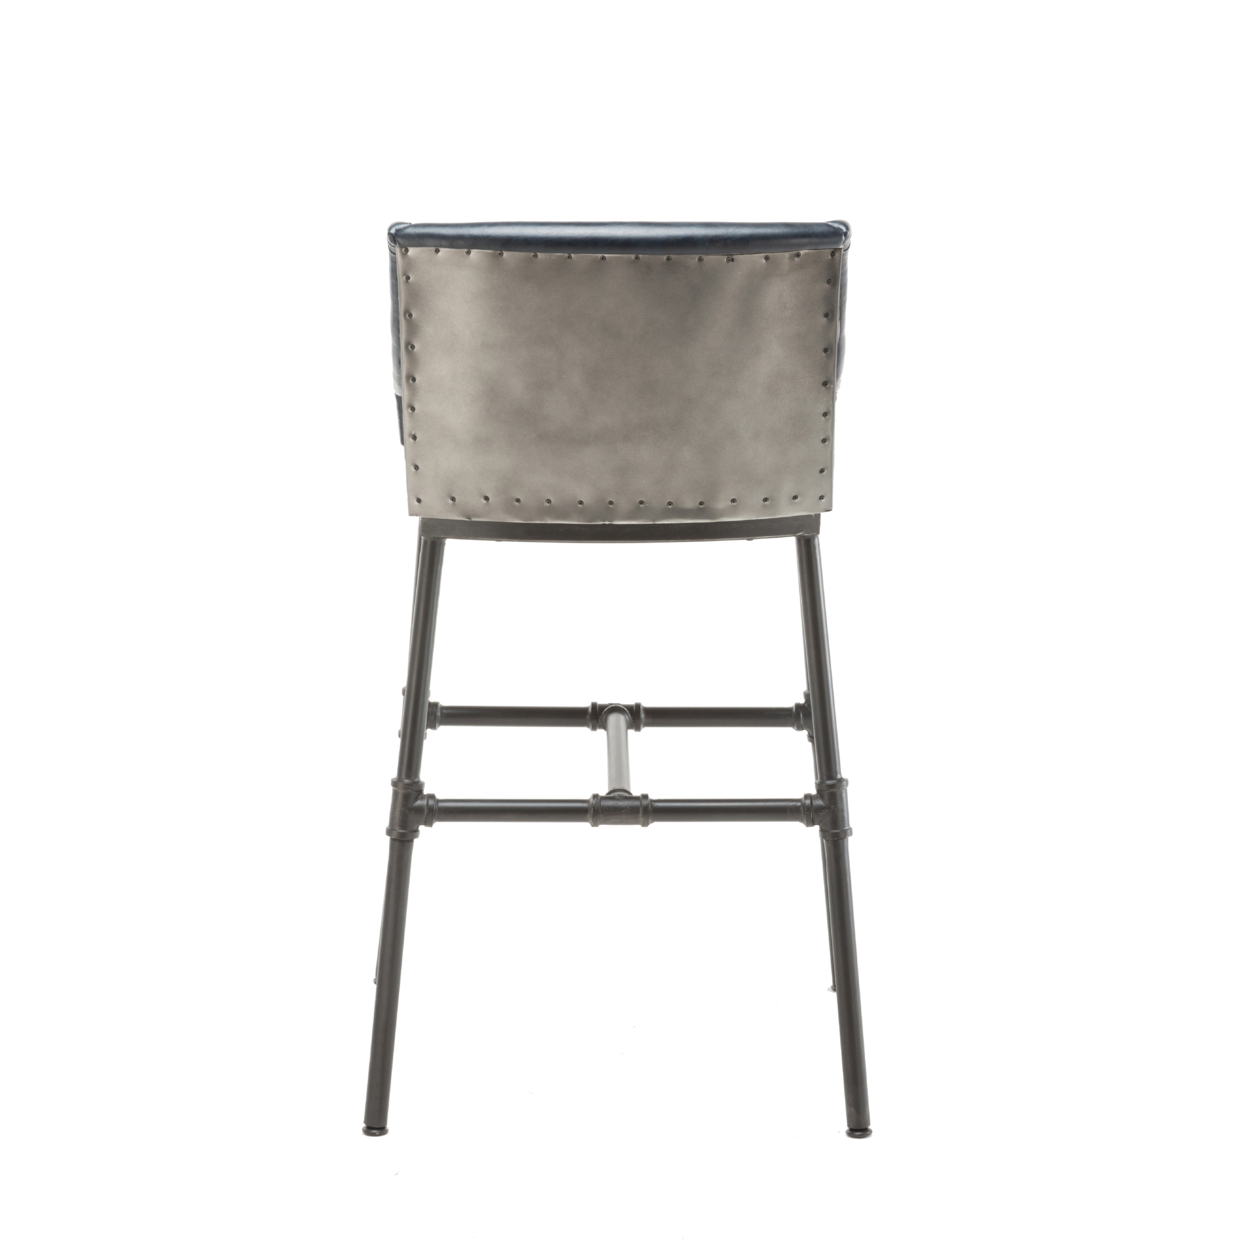 Leatherette Bar Stool With Riveted Metal Backing, Blue And Black- Saltoro Sherpi